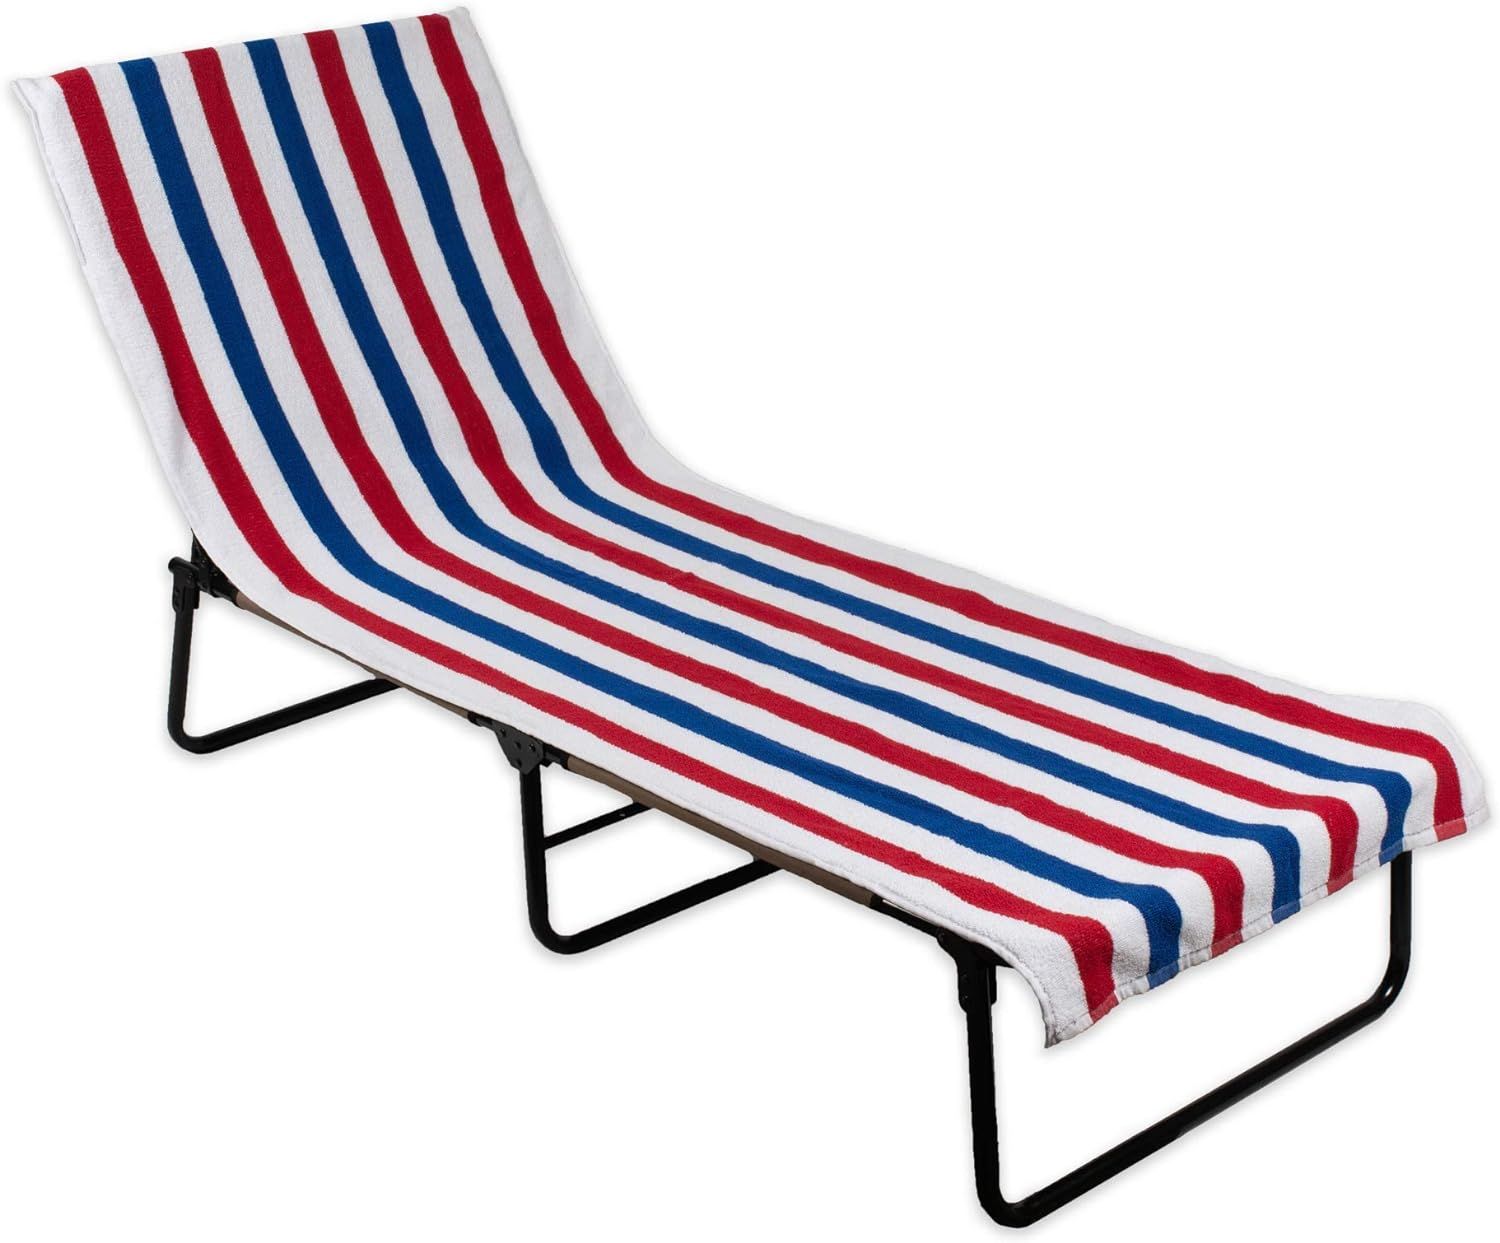 DII Stripe Beach Lounge Chair Towel with Fitted Top Pocket, 26x82, Red, White, Blue | Amazon (US)